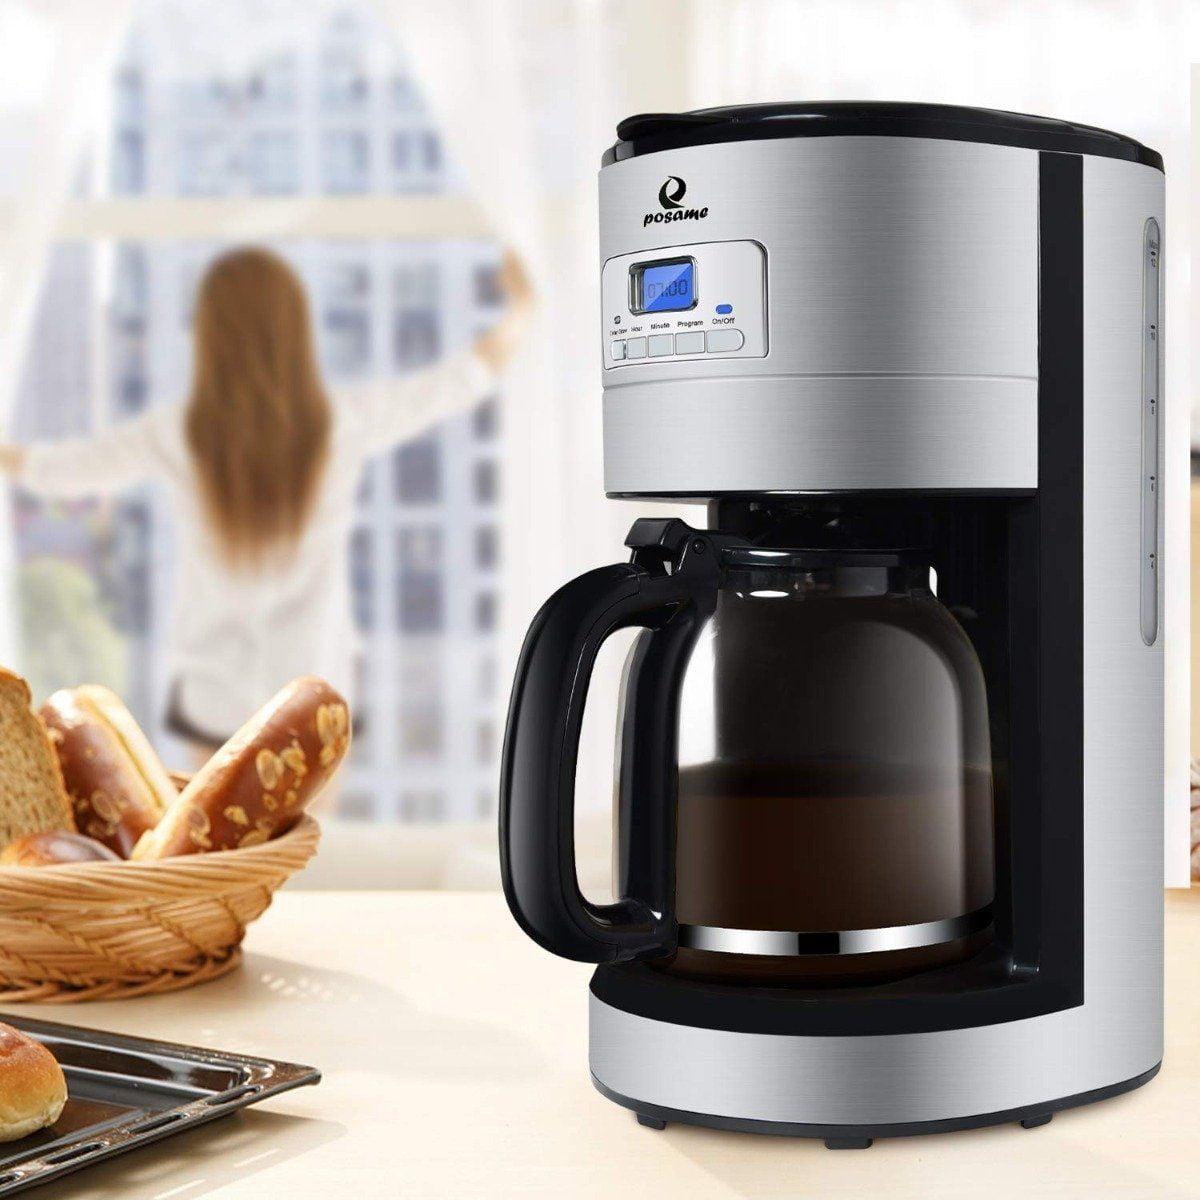 12-Cup Programmable Stainless Steel Coffee Maker - Walmart.com Stainless Steel Coffee Maker Walmart